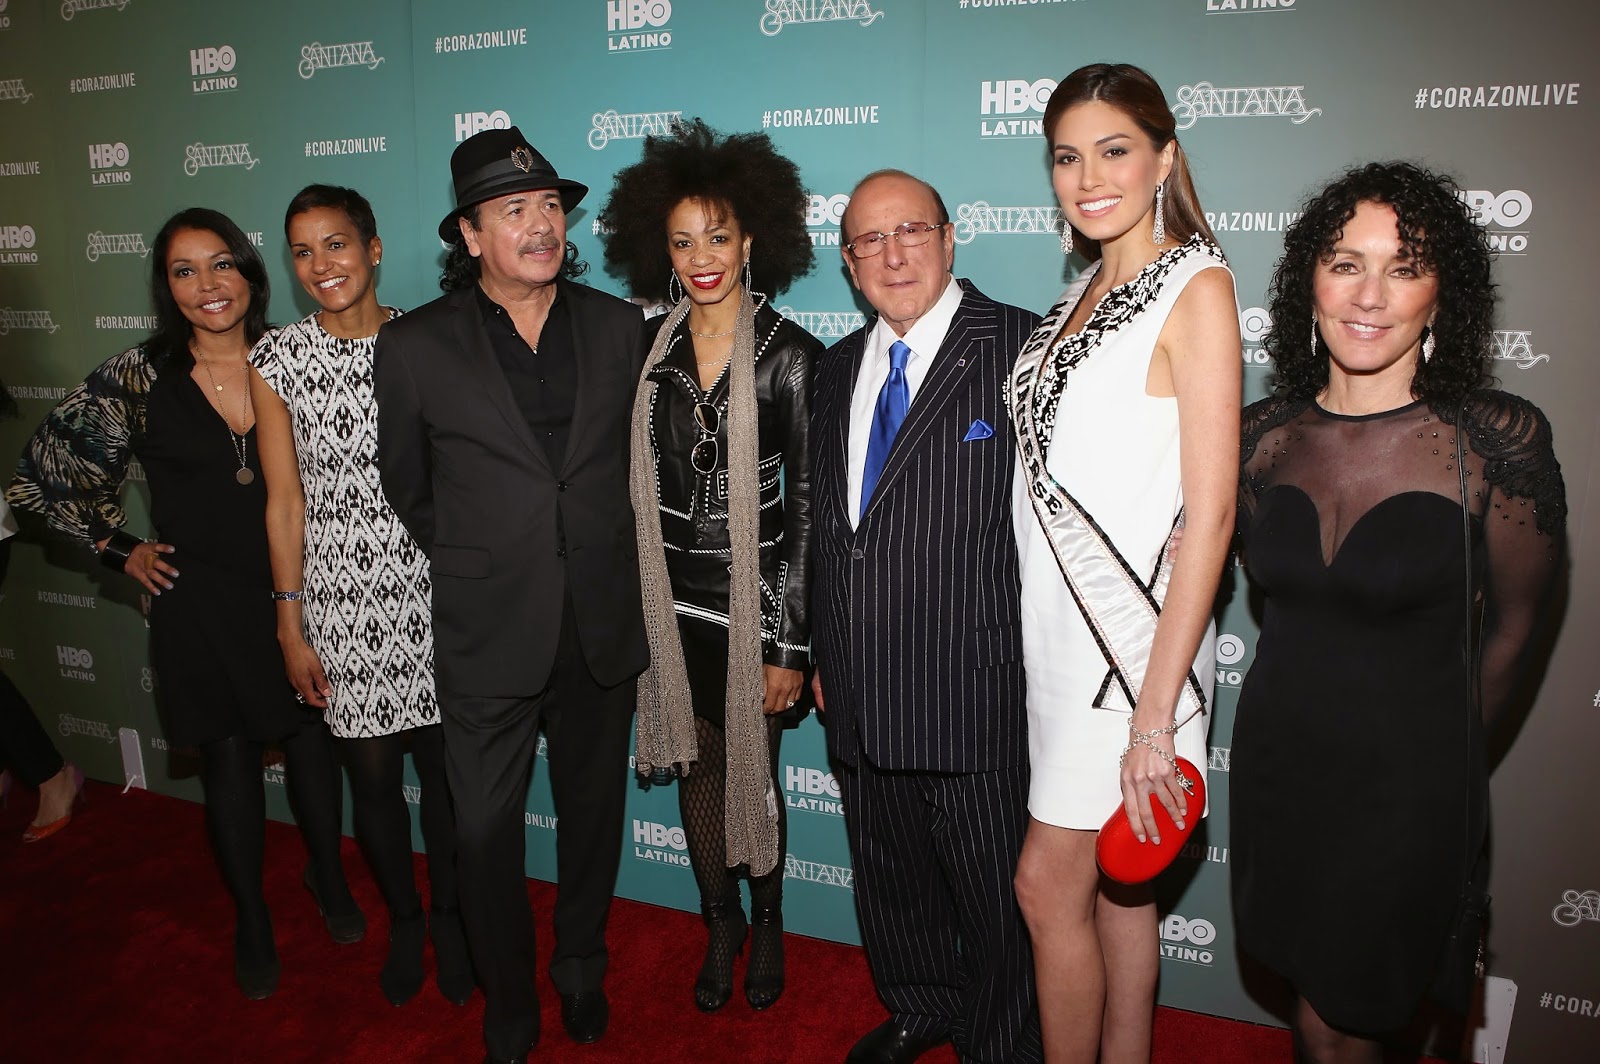 HBO Latino Santana-Corazón: Live from Mexico: Live It to Believe It Premiere Event. 